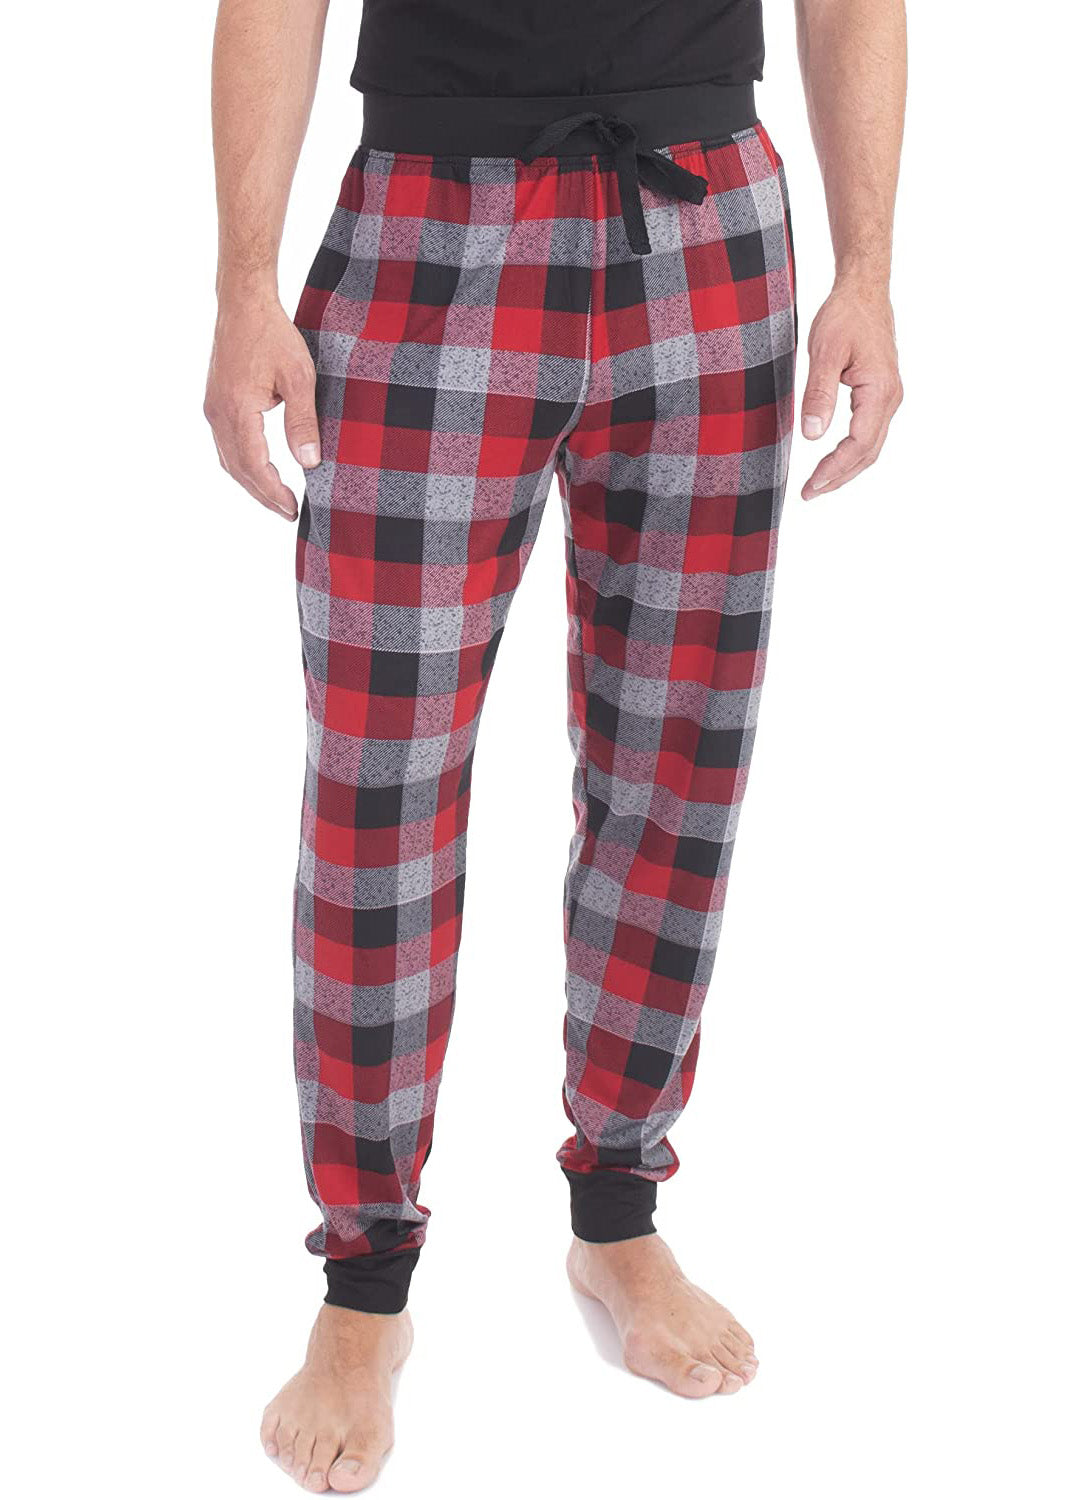 Red Black Plaid Pajama Pants Men Lounging Relaxed House PJs Sleep Bottoms  Mens Flannel Cotton Drawstring Button Fly Sleepwear